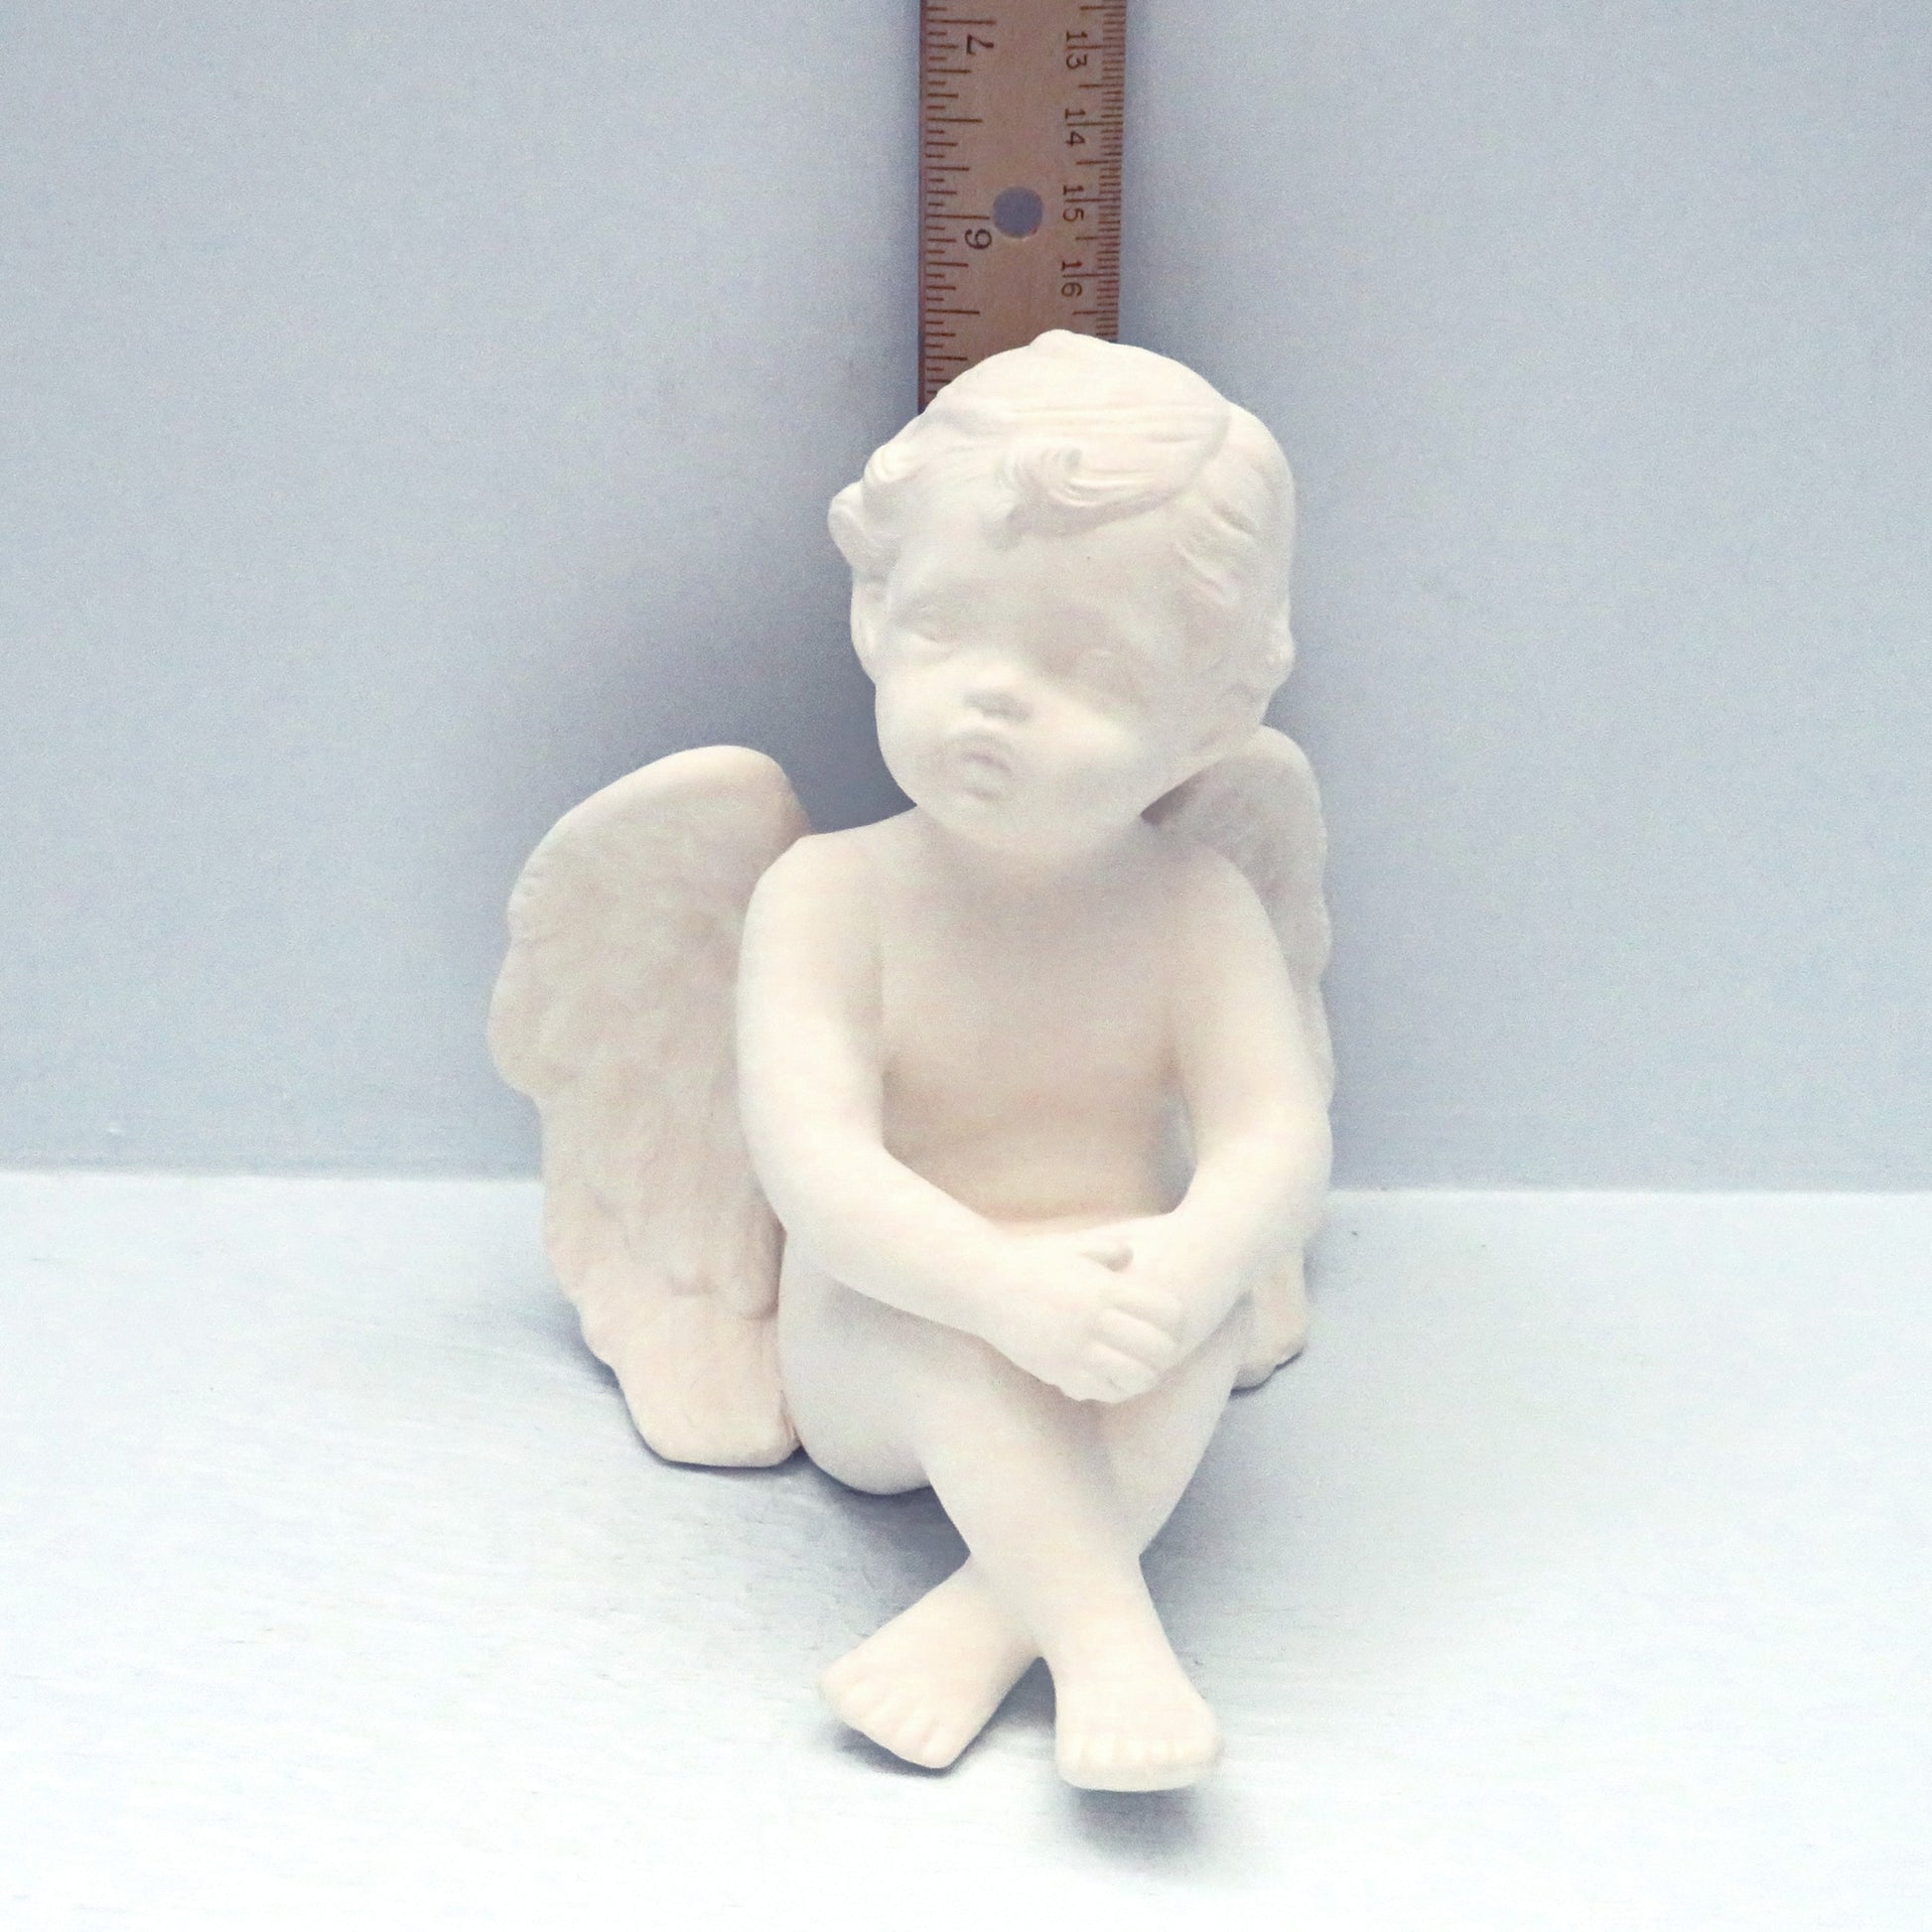 Ceramic cherub to paint sitting in front of a ruler showing it to be approximately 5 1/2 inches tall